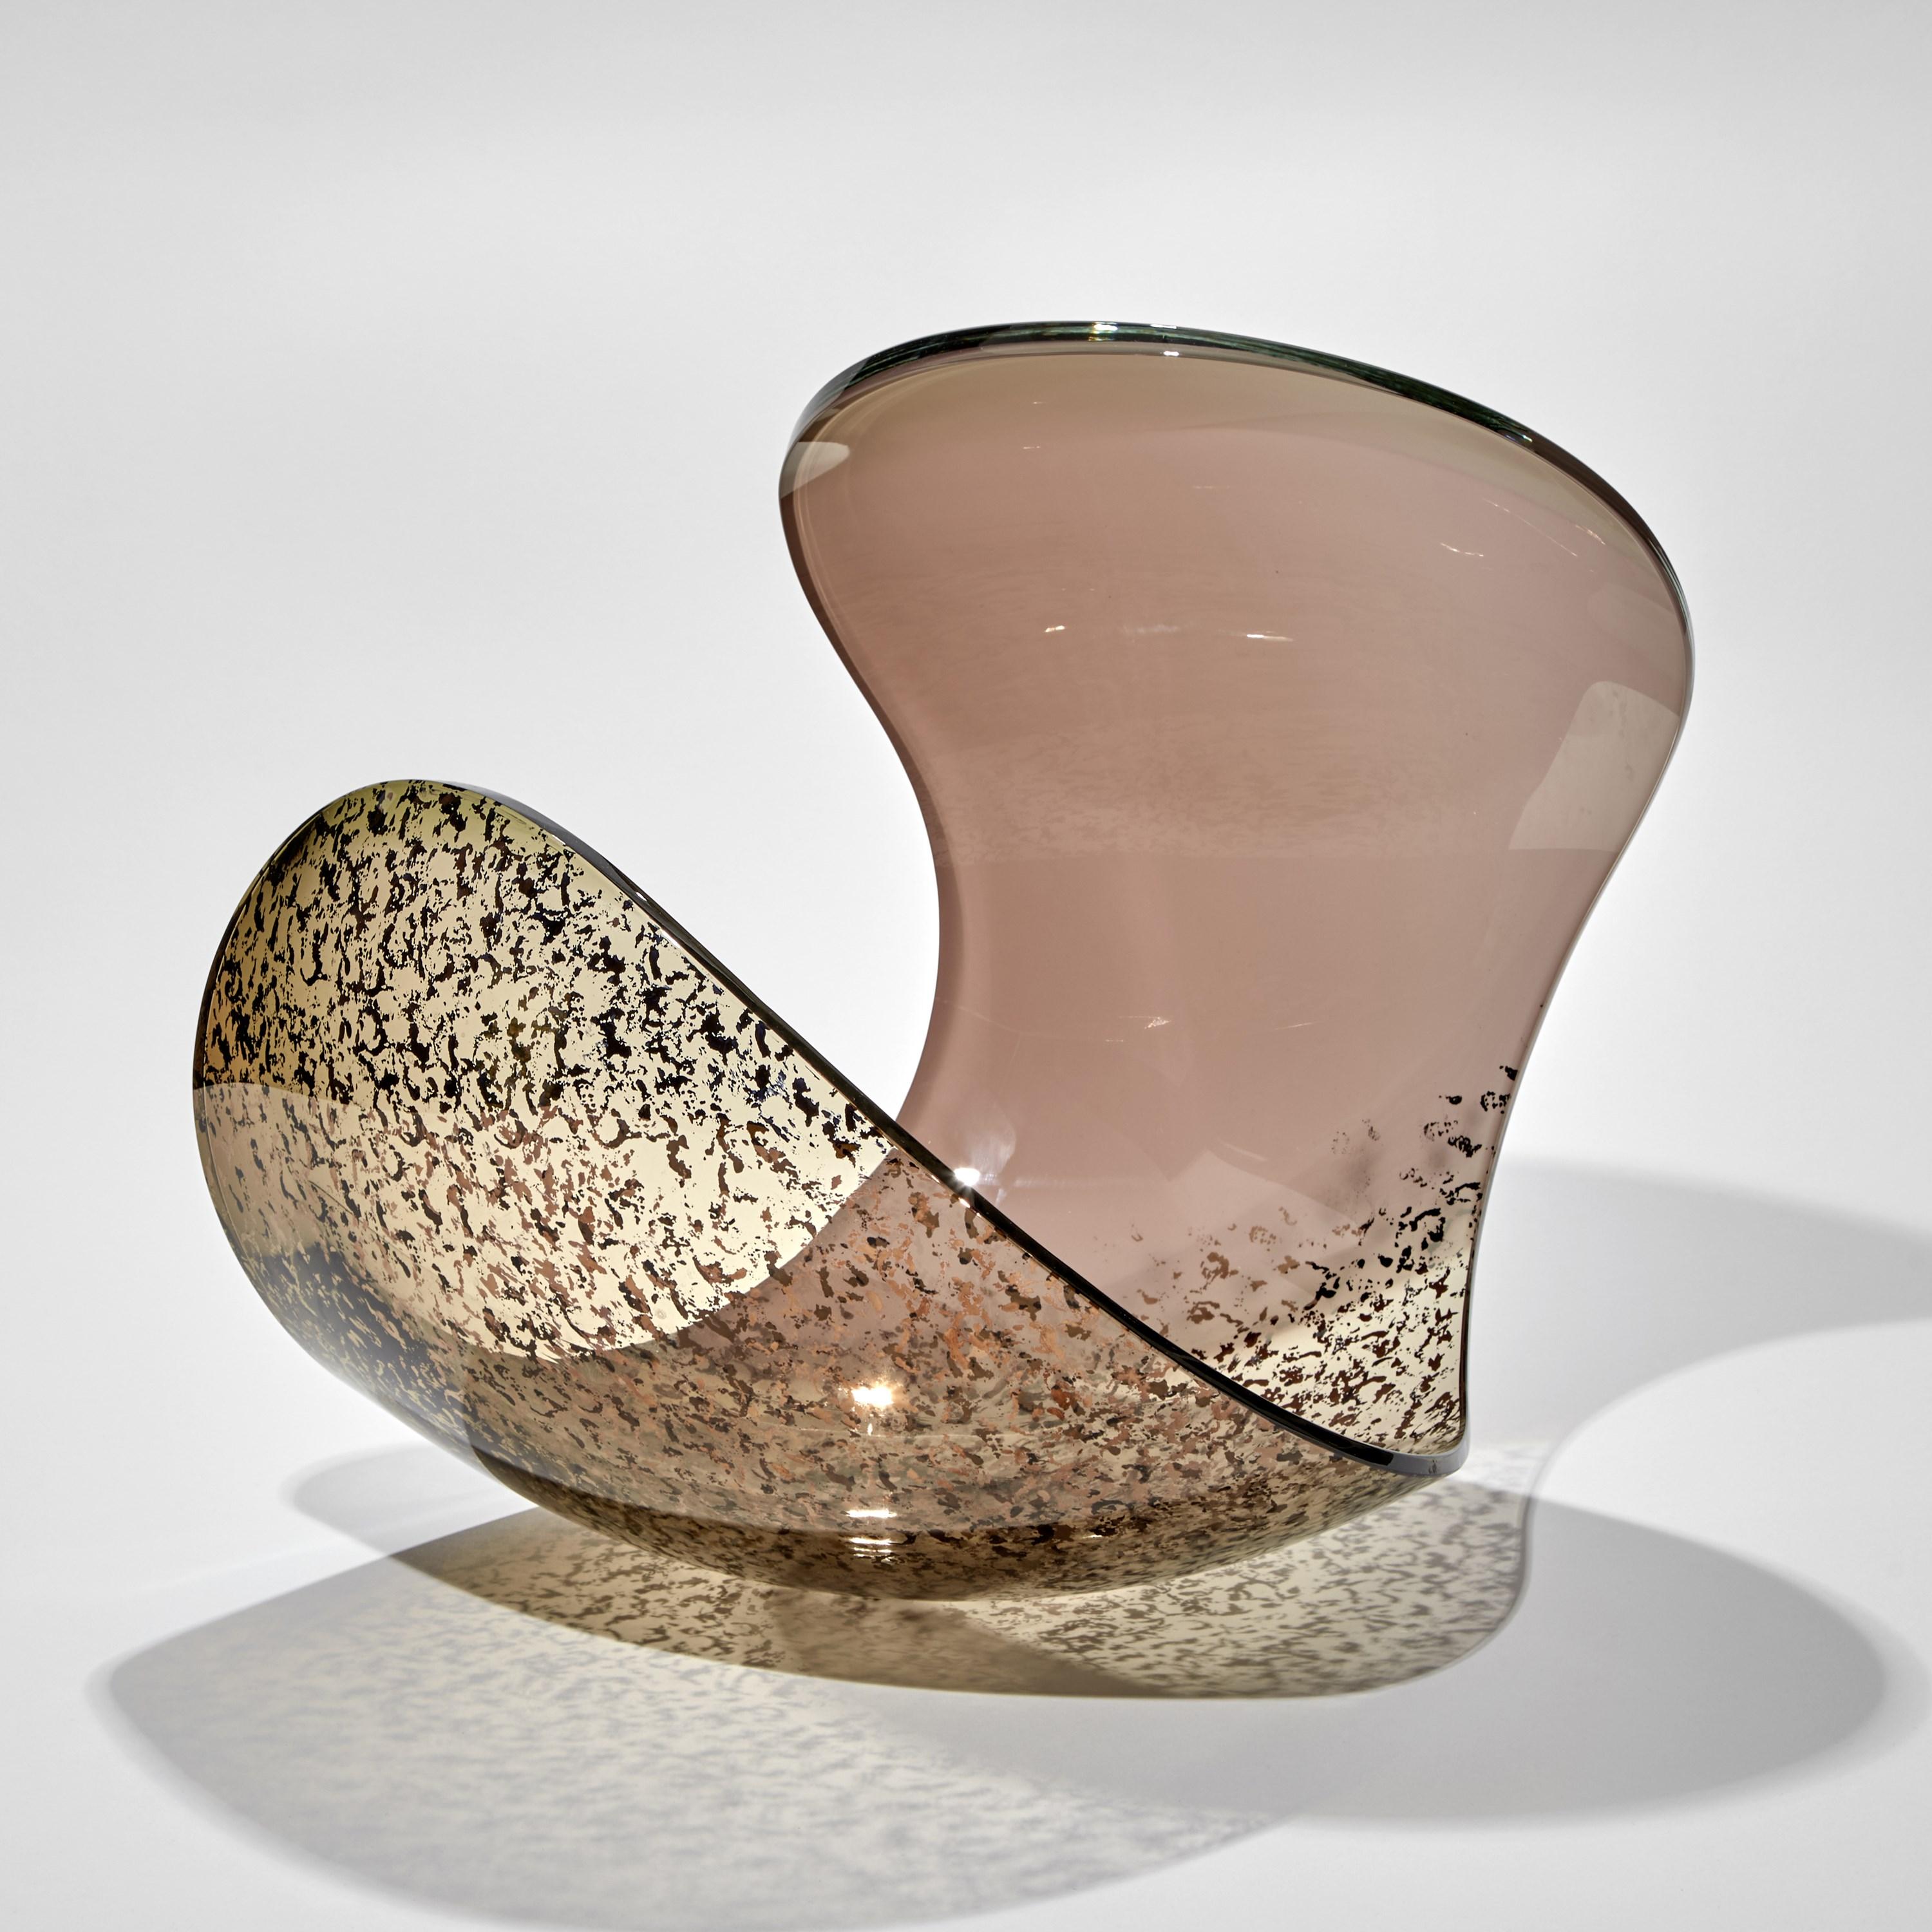 Organic Modern Planet in Pink, Brown & Gold, a Glass Sculpture & Centrepiece by Lena Bergström For Sale